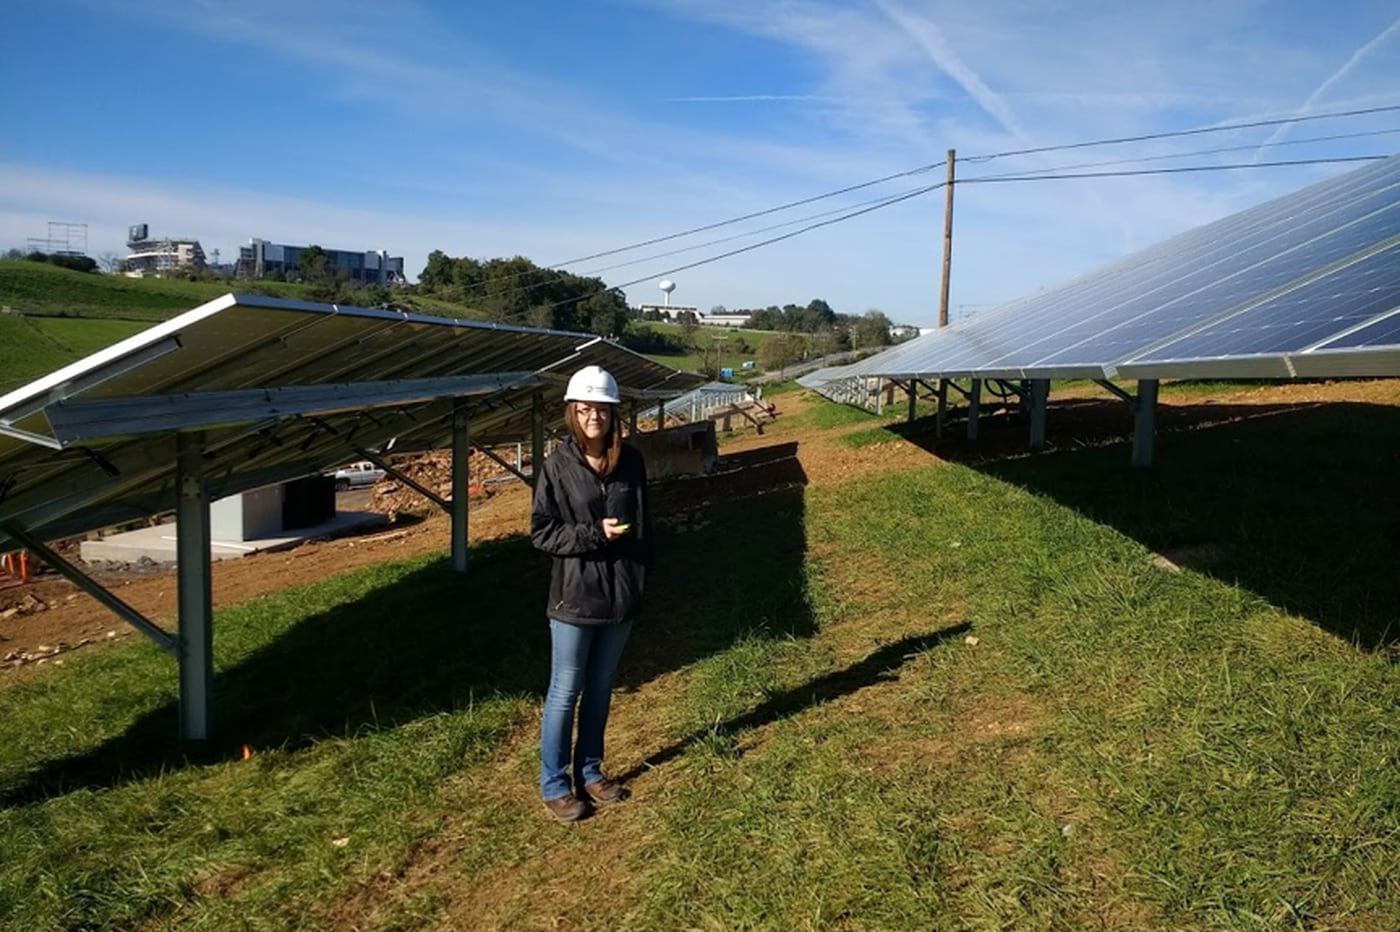 Solar as a crop? Penn State to install state’s largest solar array on 500 acres of farmland.